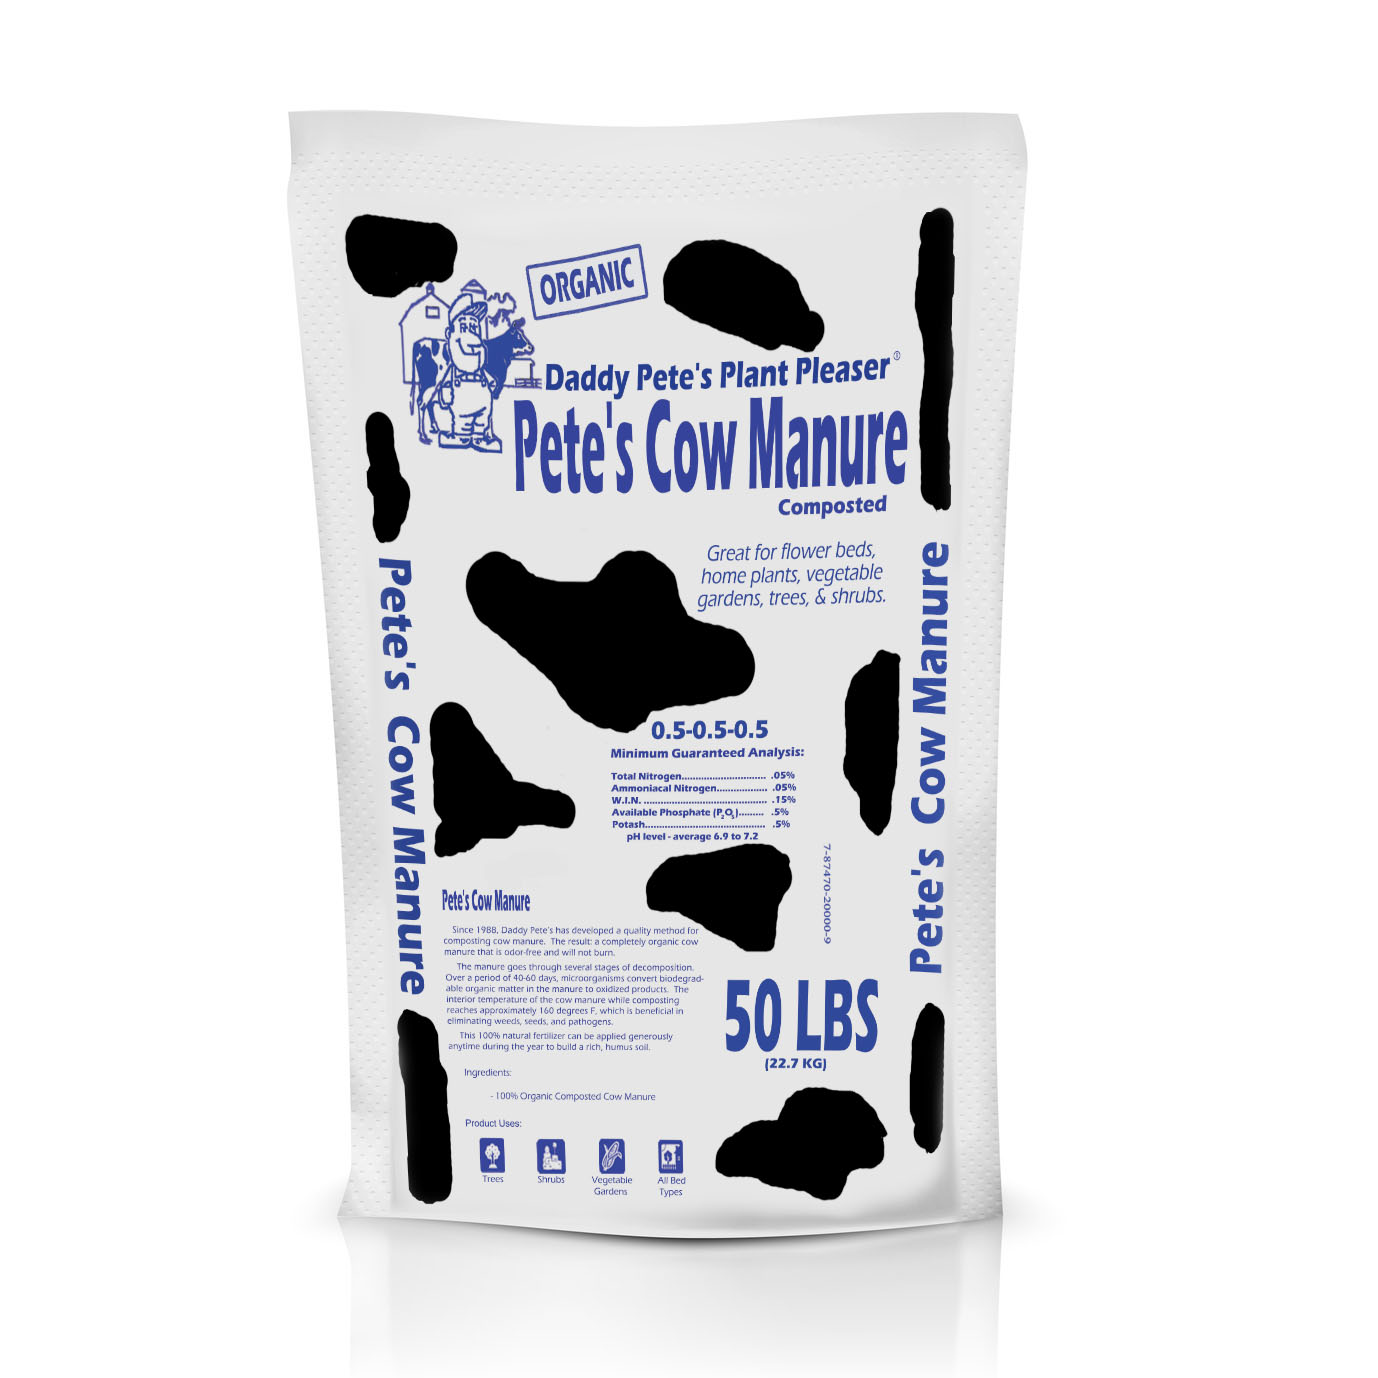 Daddy Pete’s Plant Pleaser cow manure